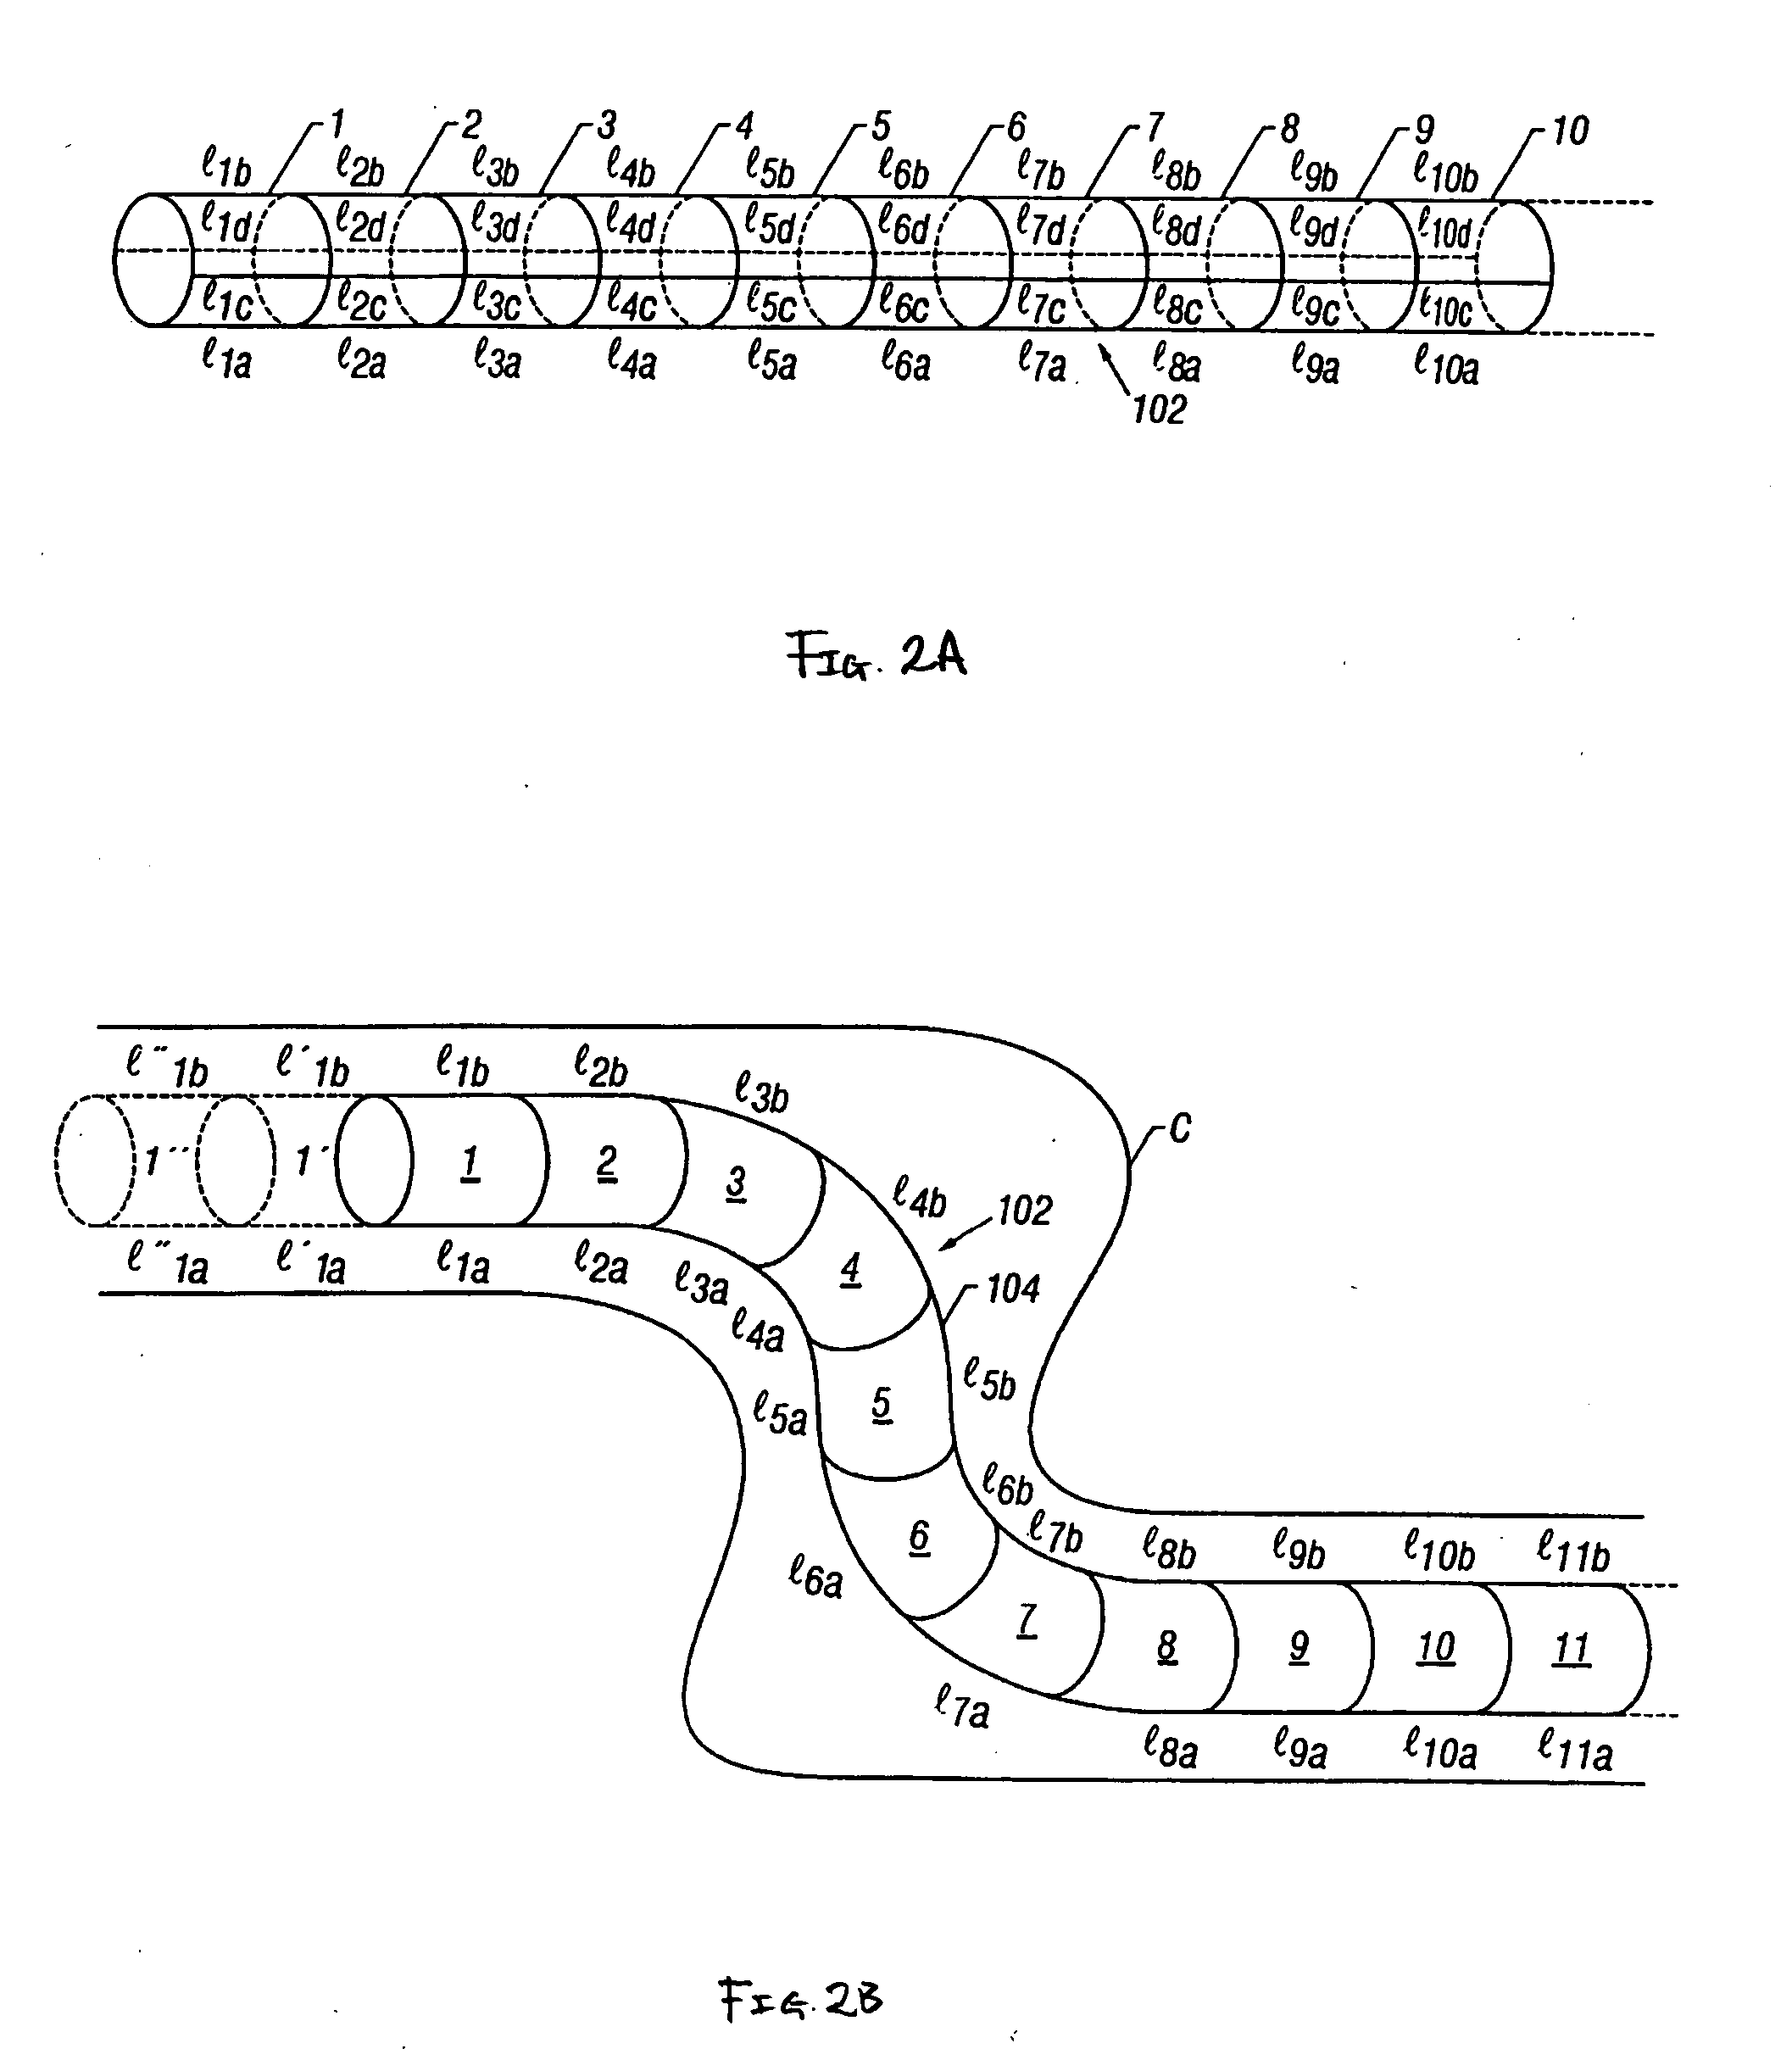 Methods and apparatus for accessing and treating regions of the body